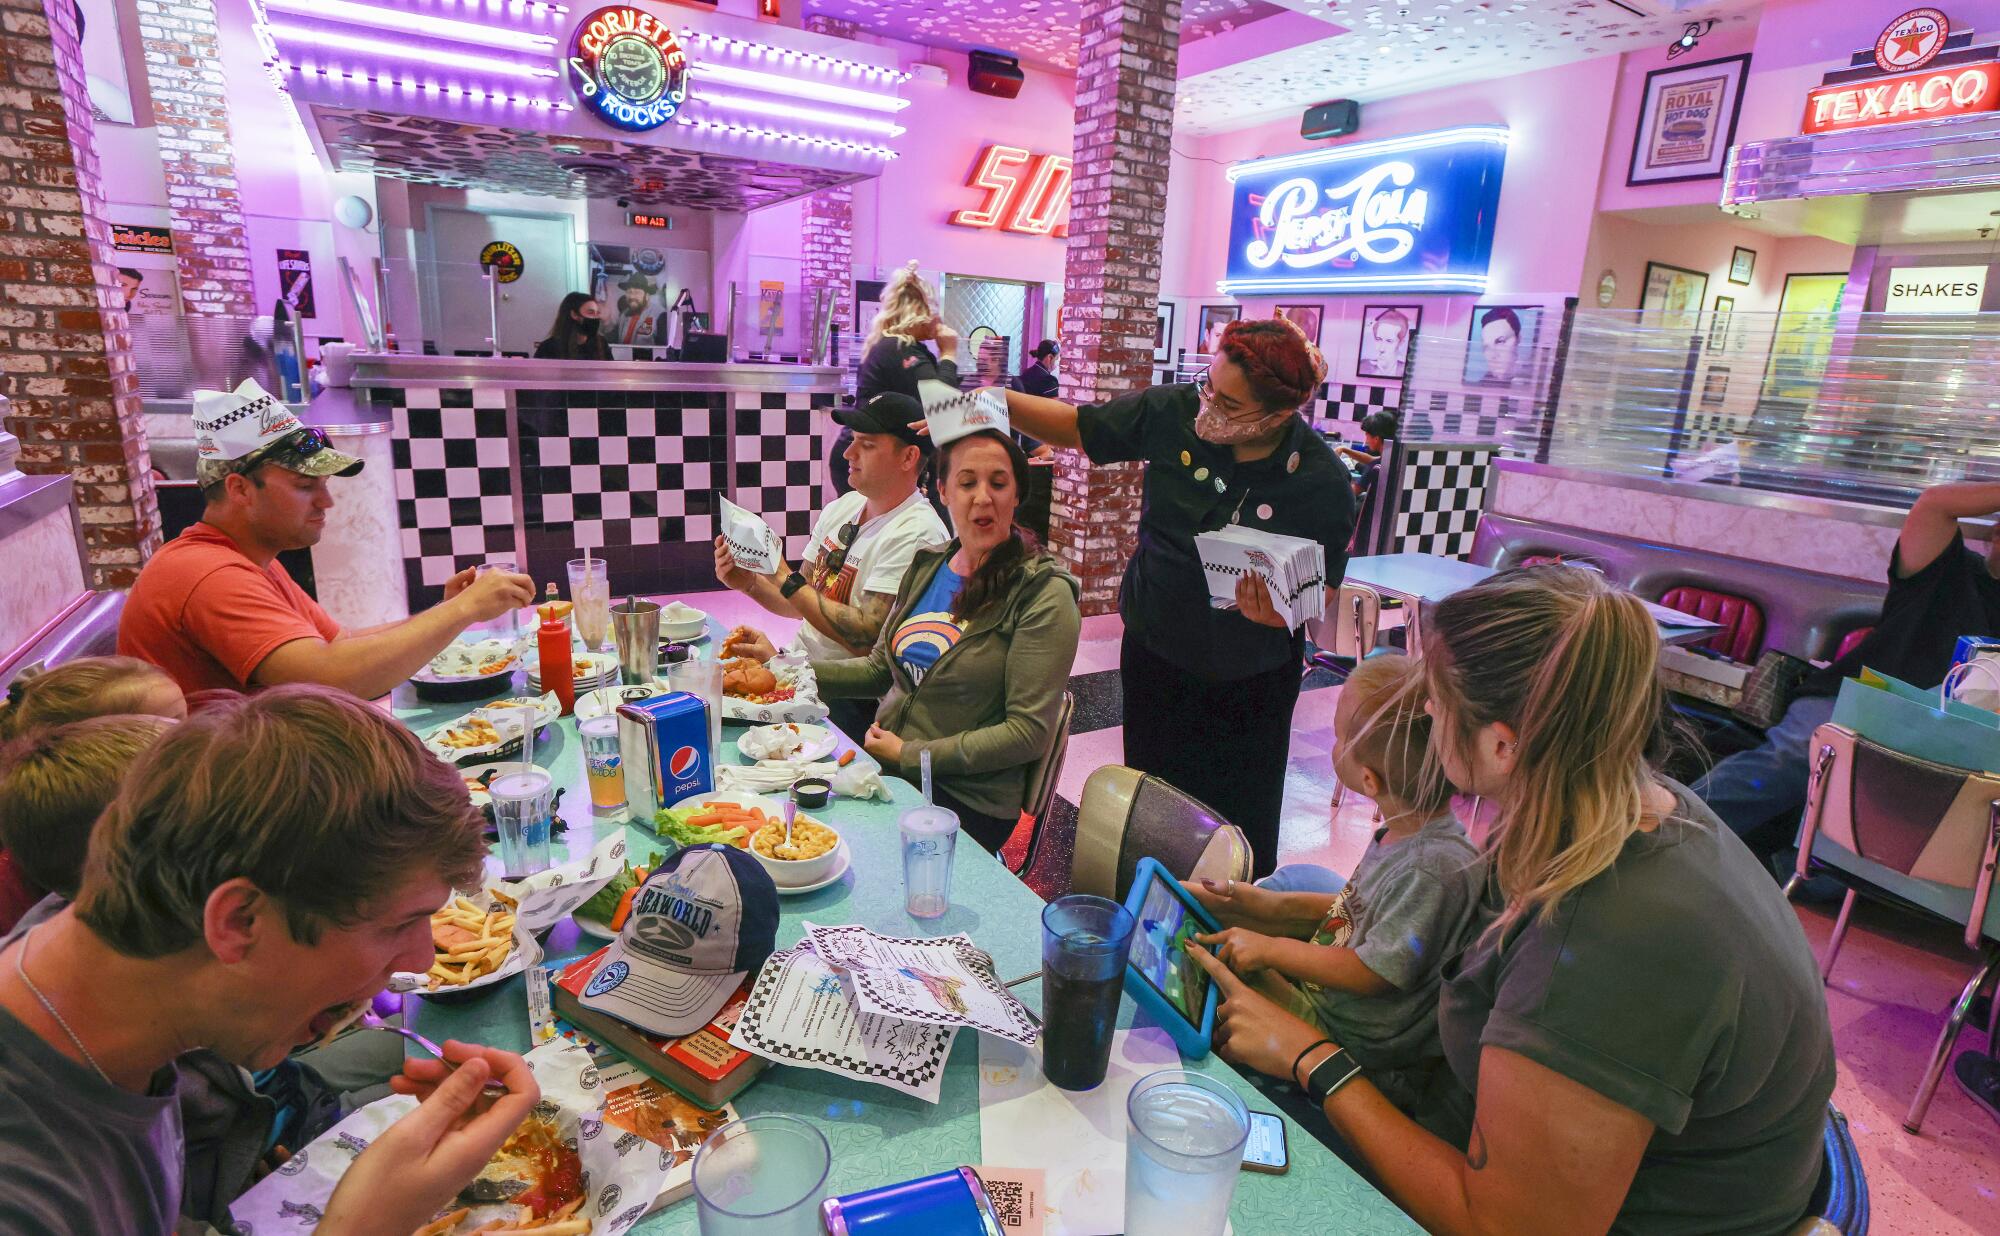 A server passes out hats last month at Corvette Diner in Liberty Station.